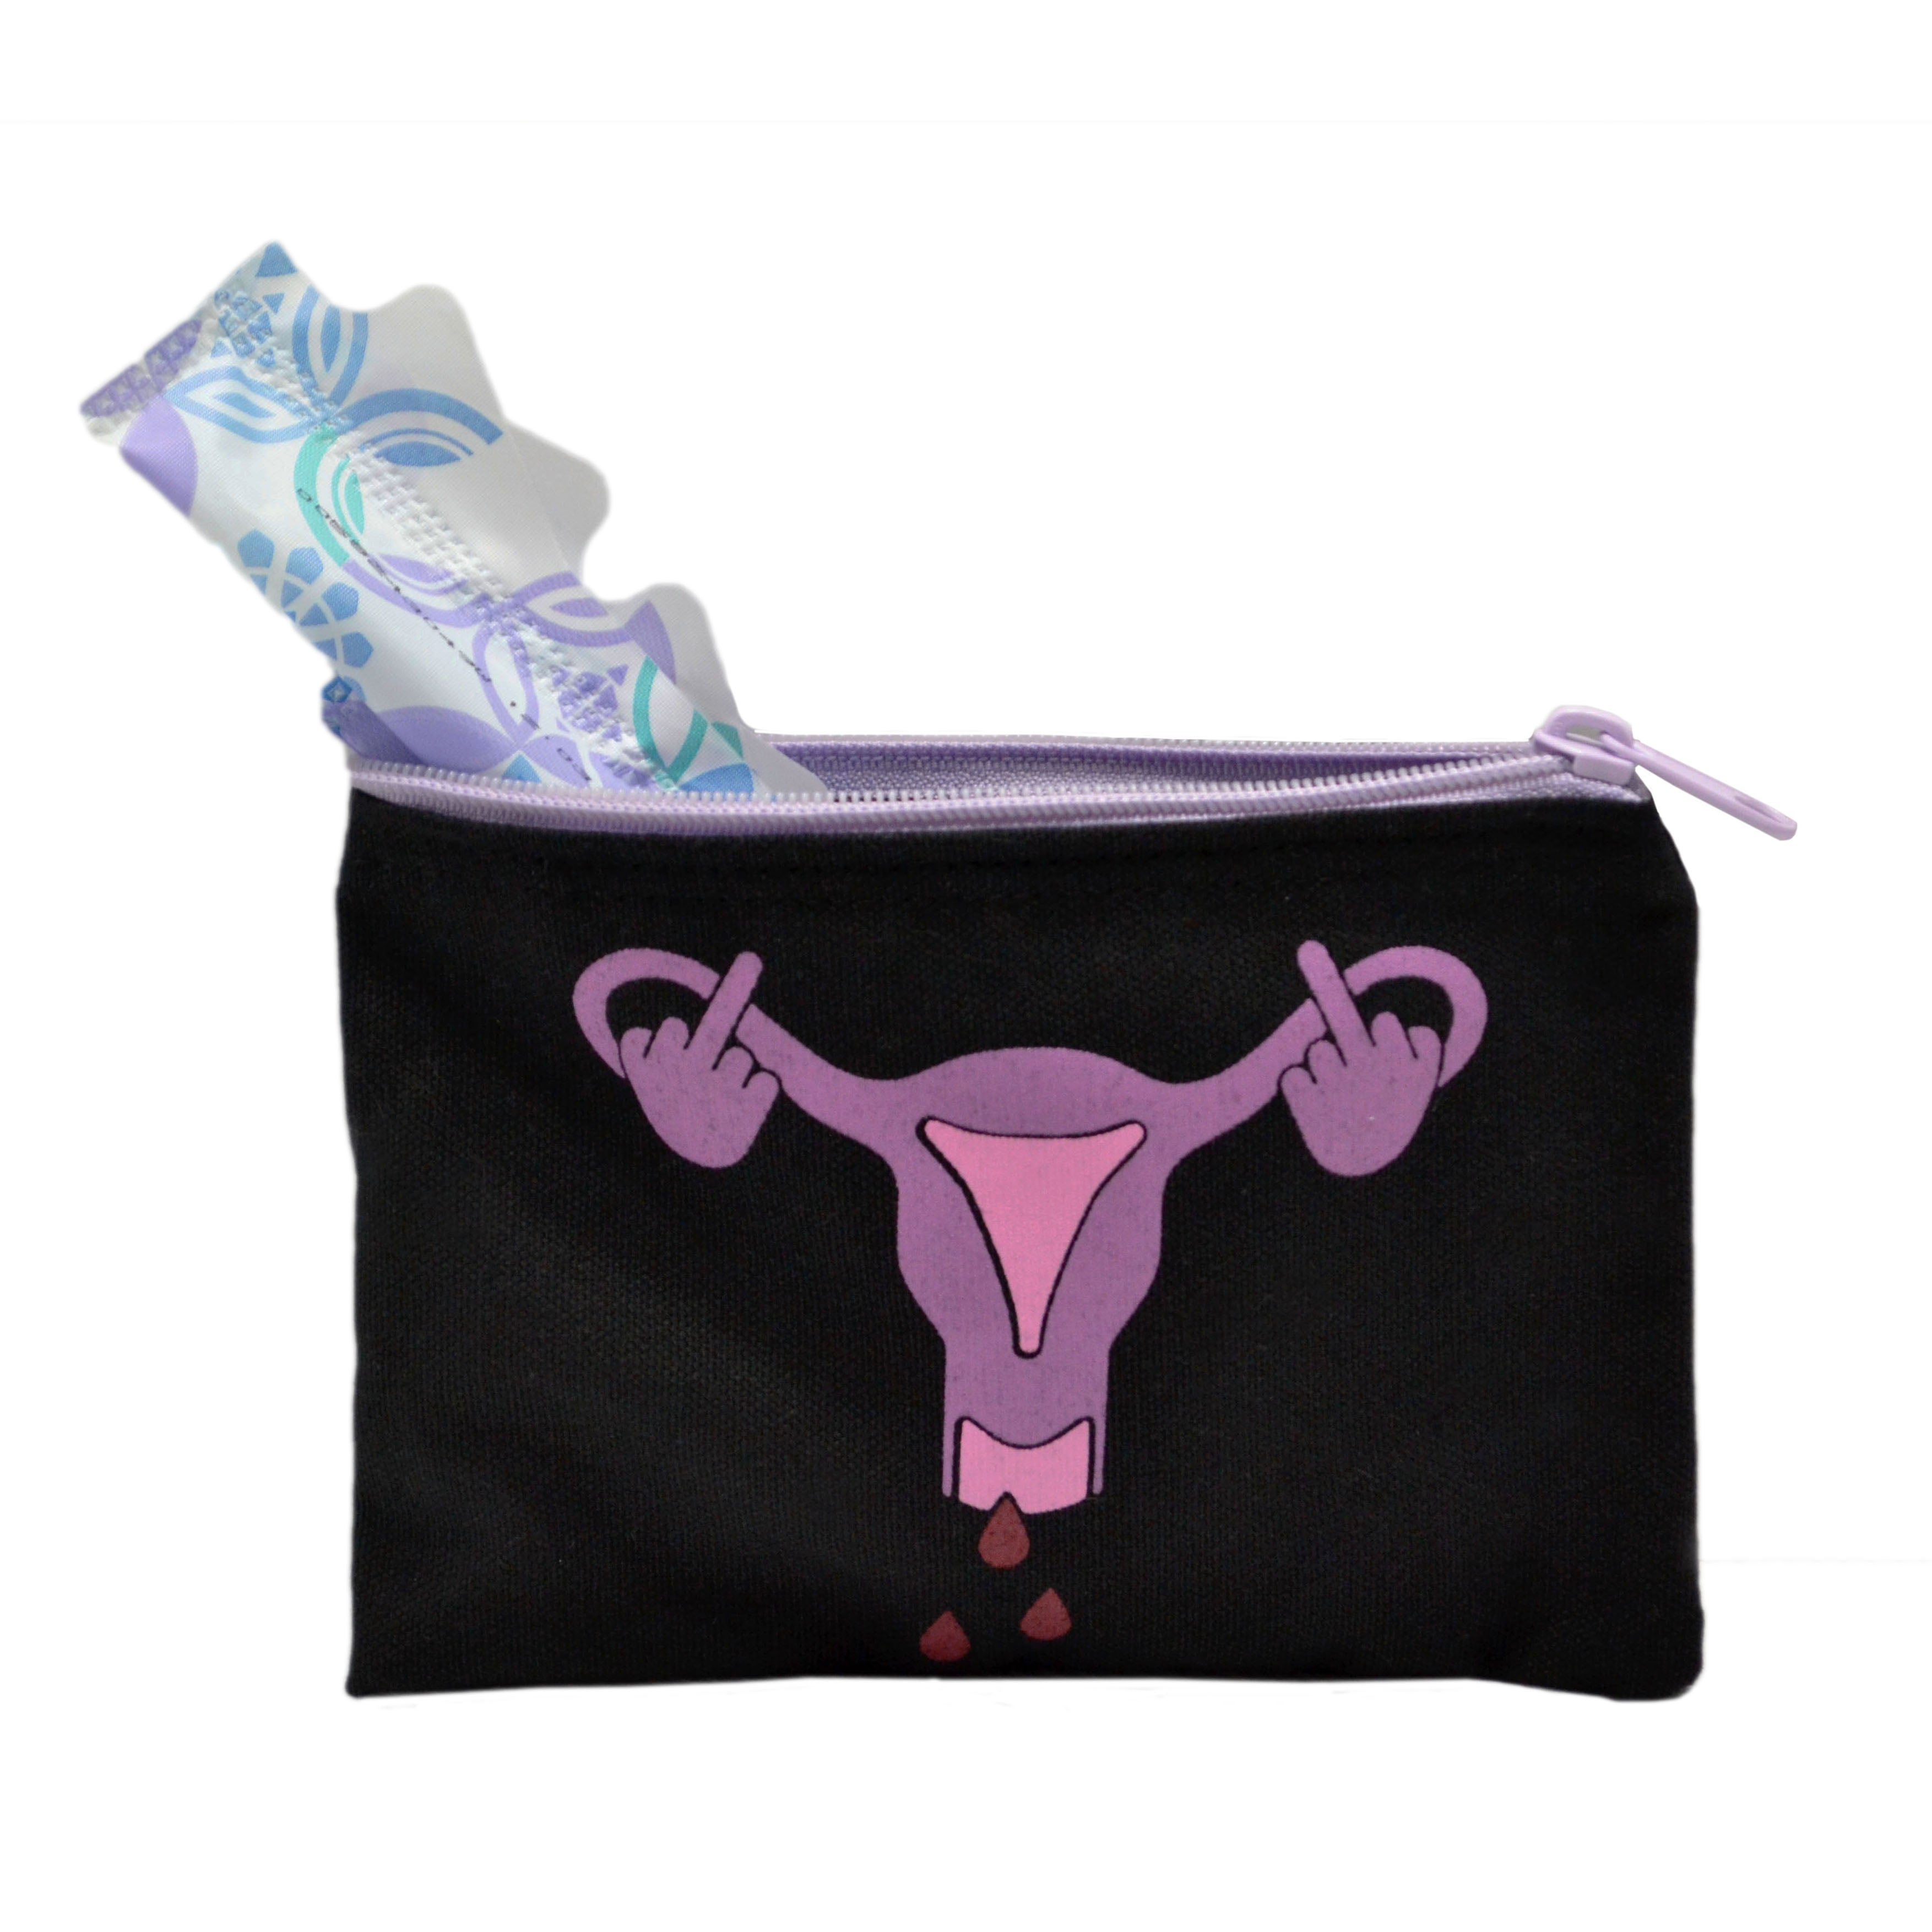 F*ck Periods Pouch